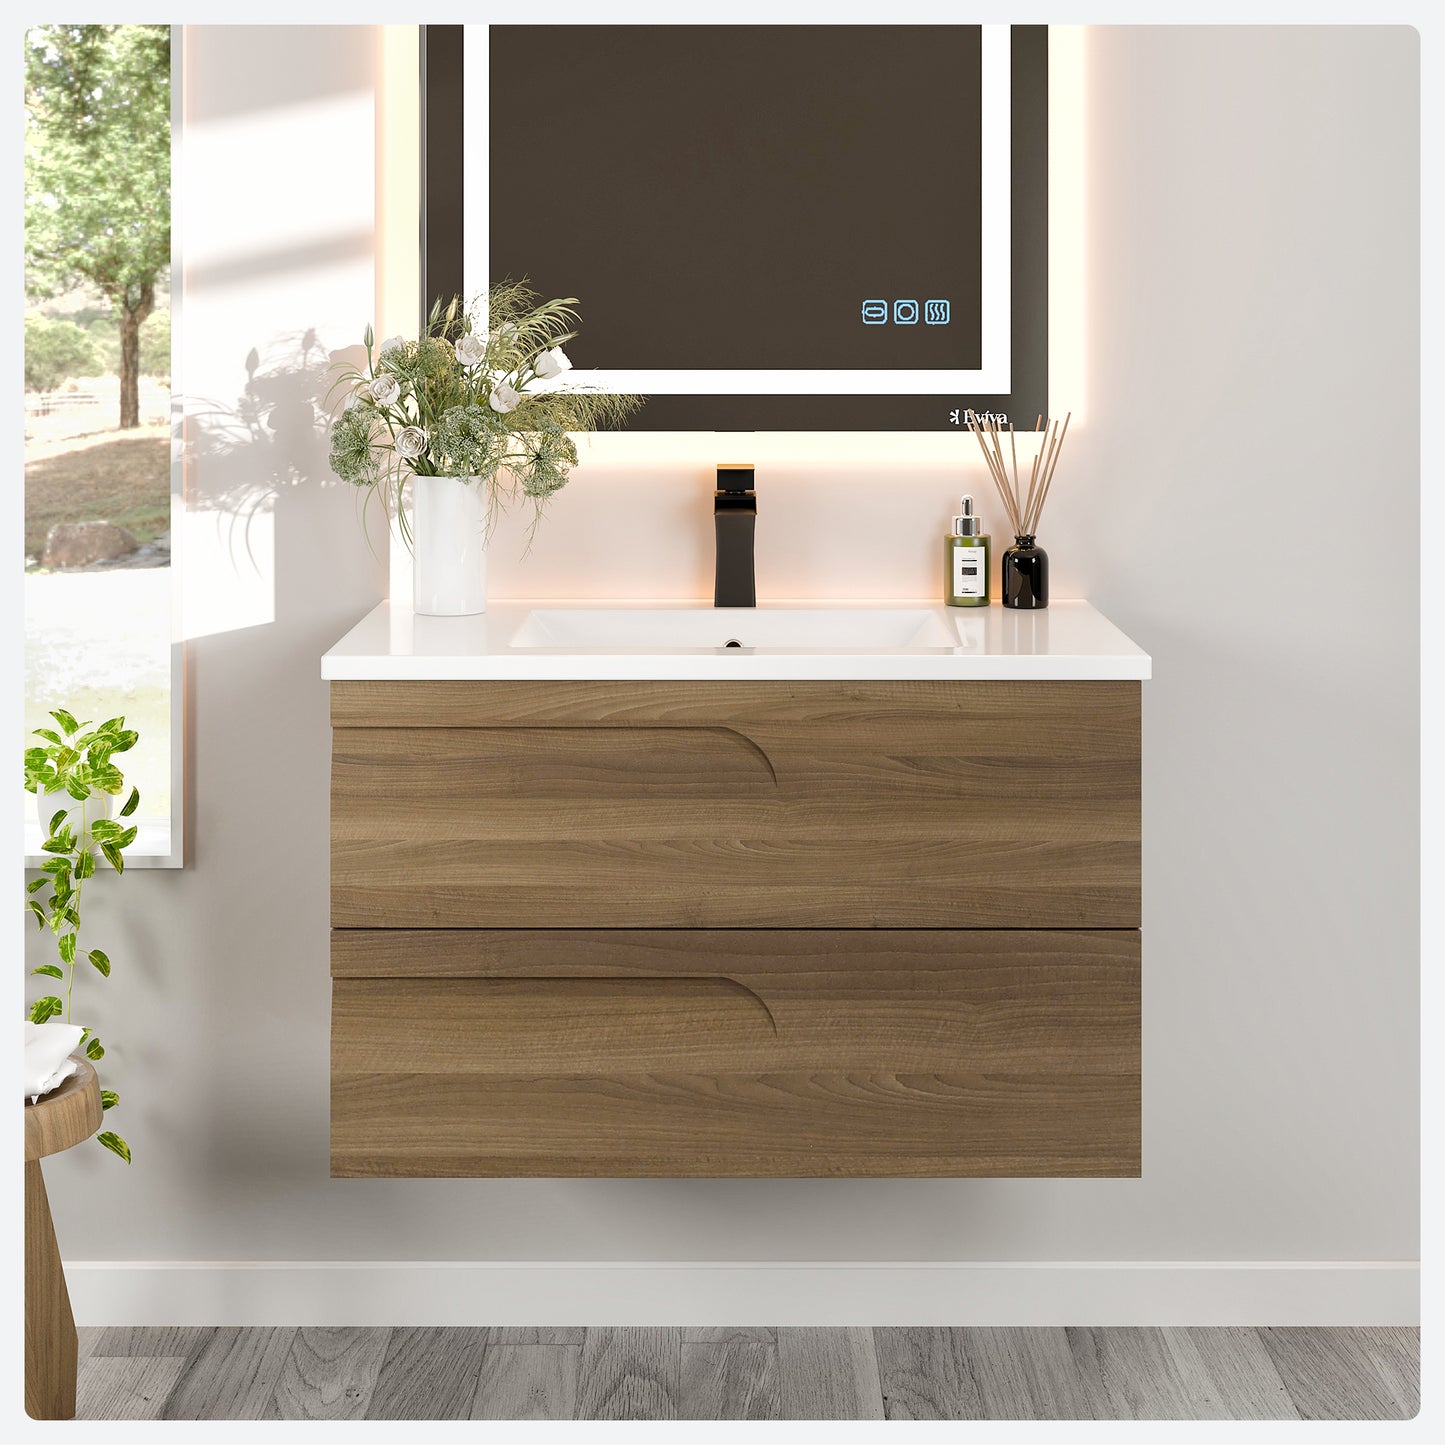 Joy 36"W x 18"D Graywood Bathroom Vanity with Porcelain Countertop and Integrated Sink